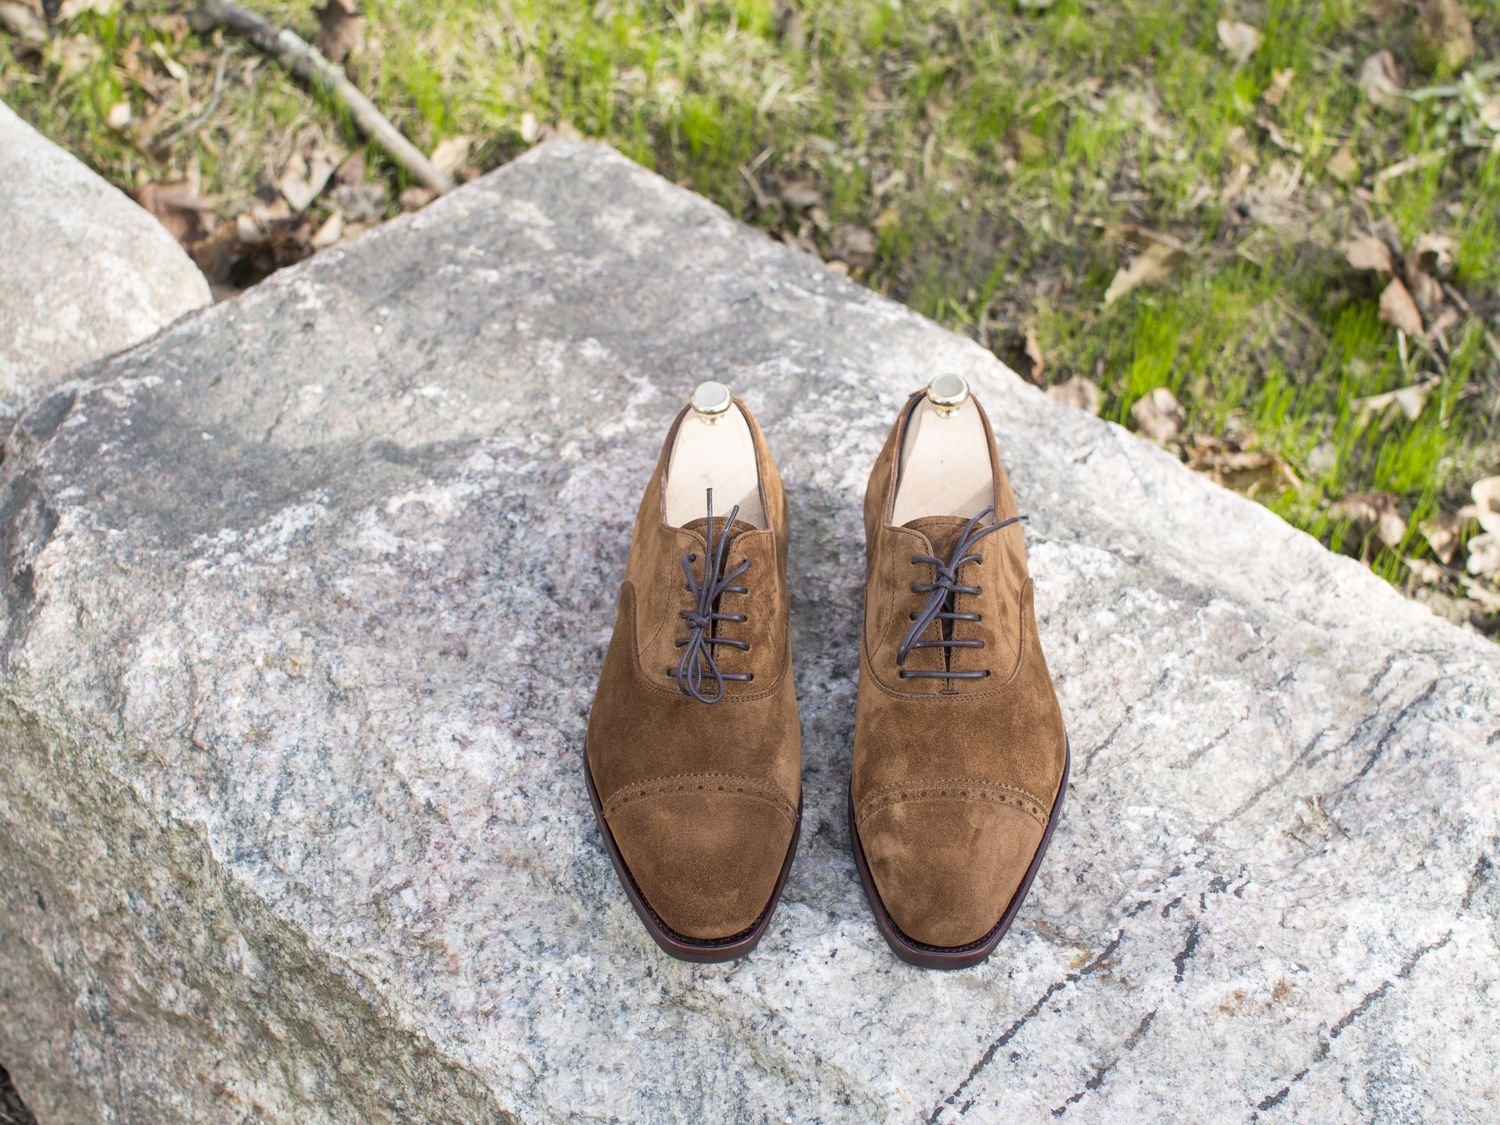 Carmina Rain Last Oxford Shoes - Suede Goodness for Spring